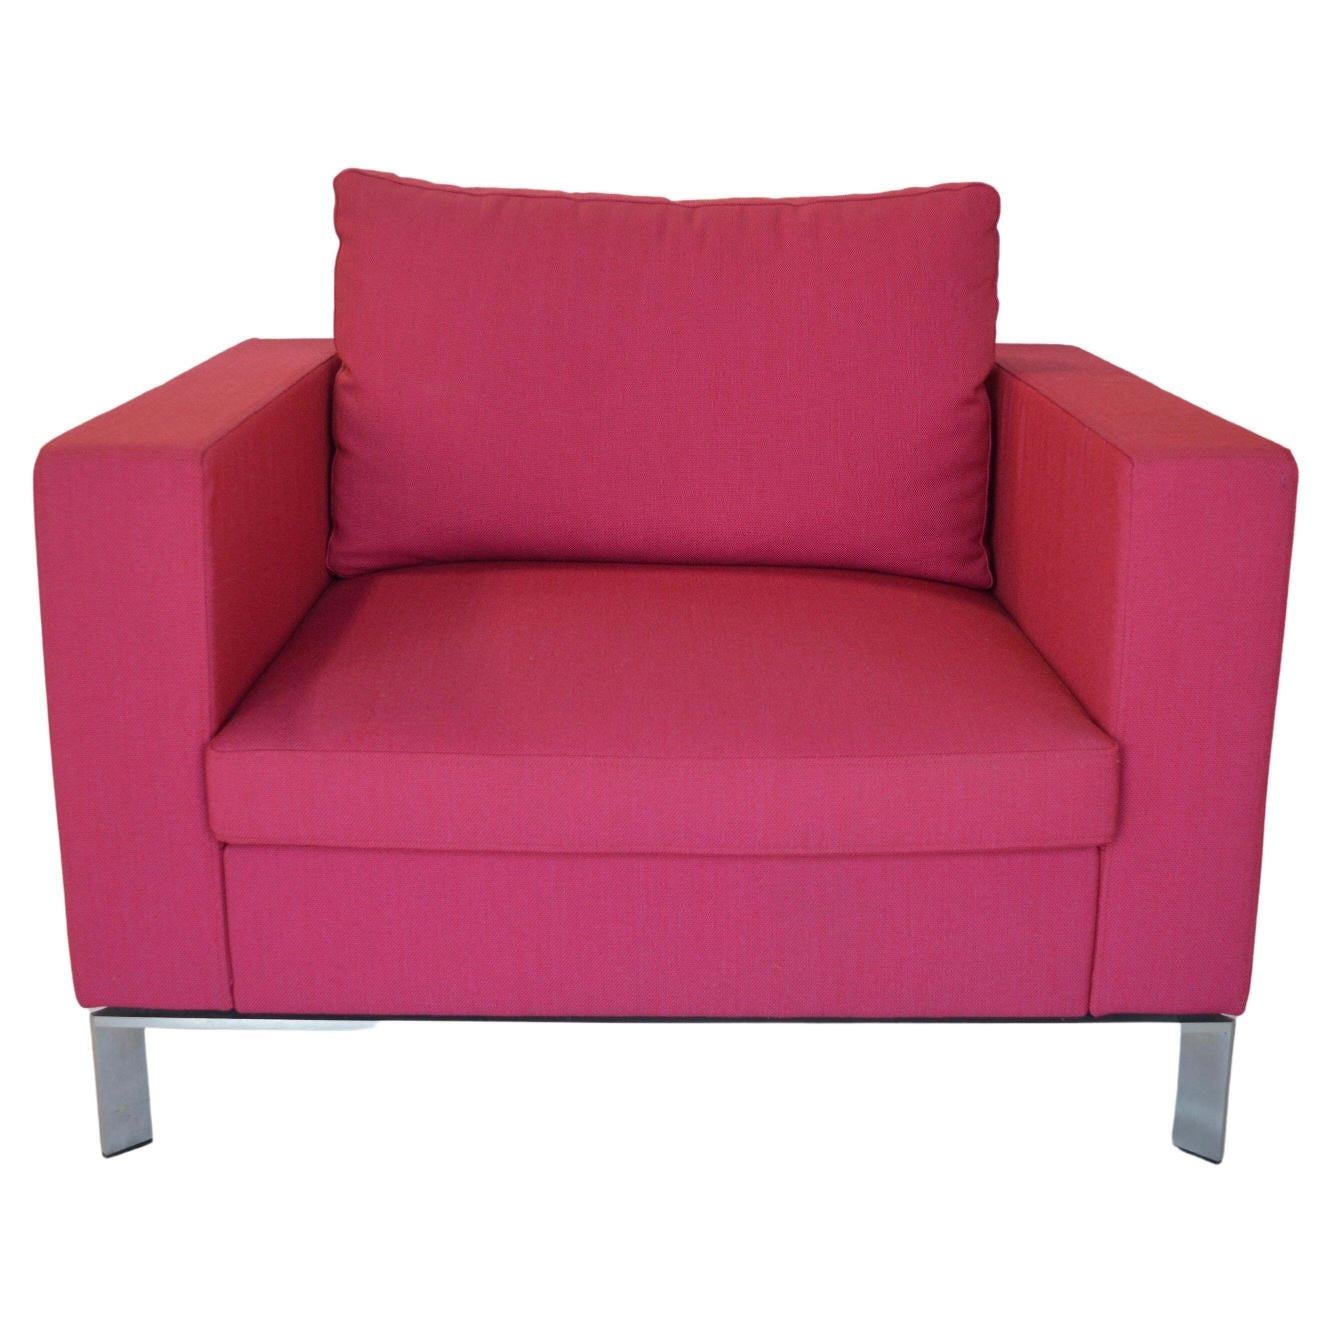 Modern Pink Upholstered Allermuir Stirling Armchairs. England, c. 2000s (21st Century) By Pearson Lloyd

Can Be Sold Separately $2,500 each